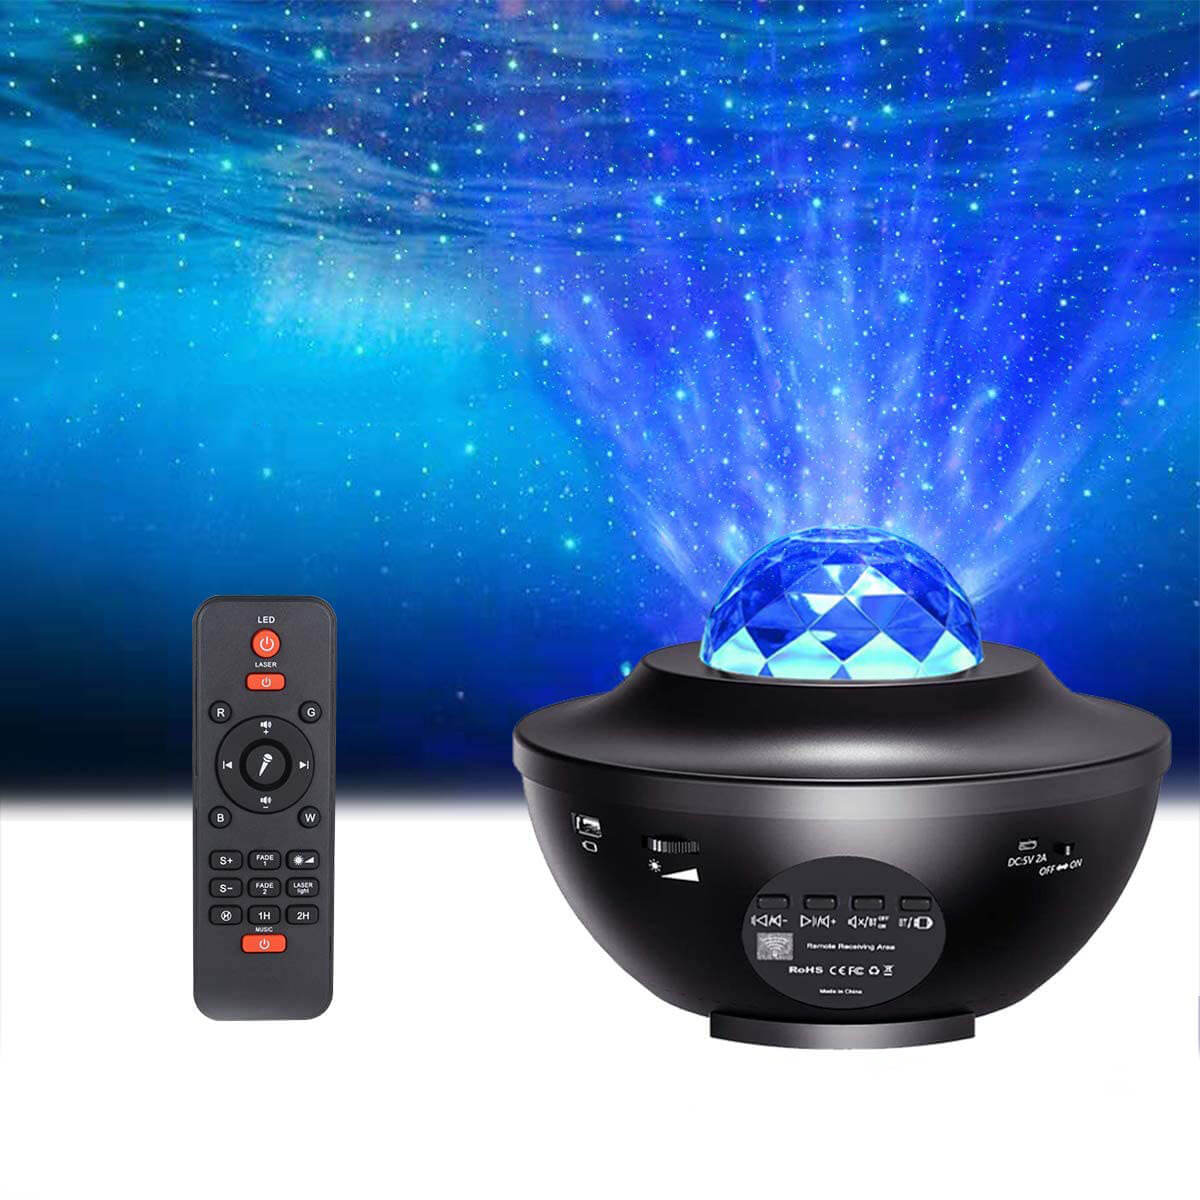 How do you choose a star galaxy projector